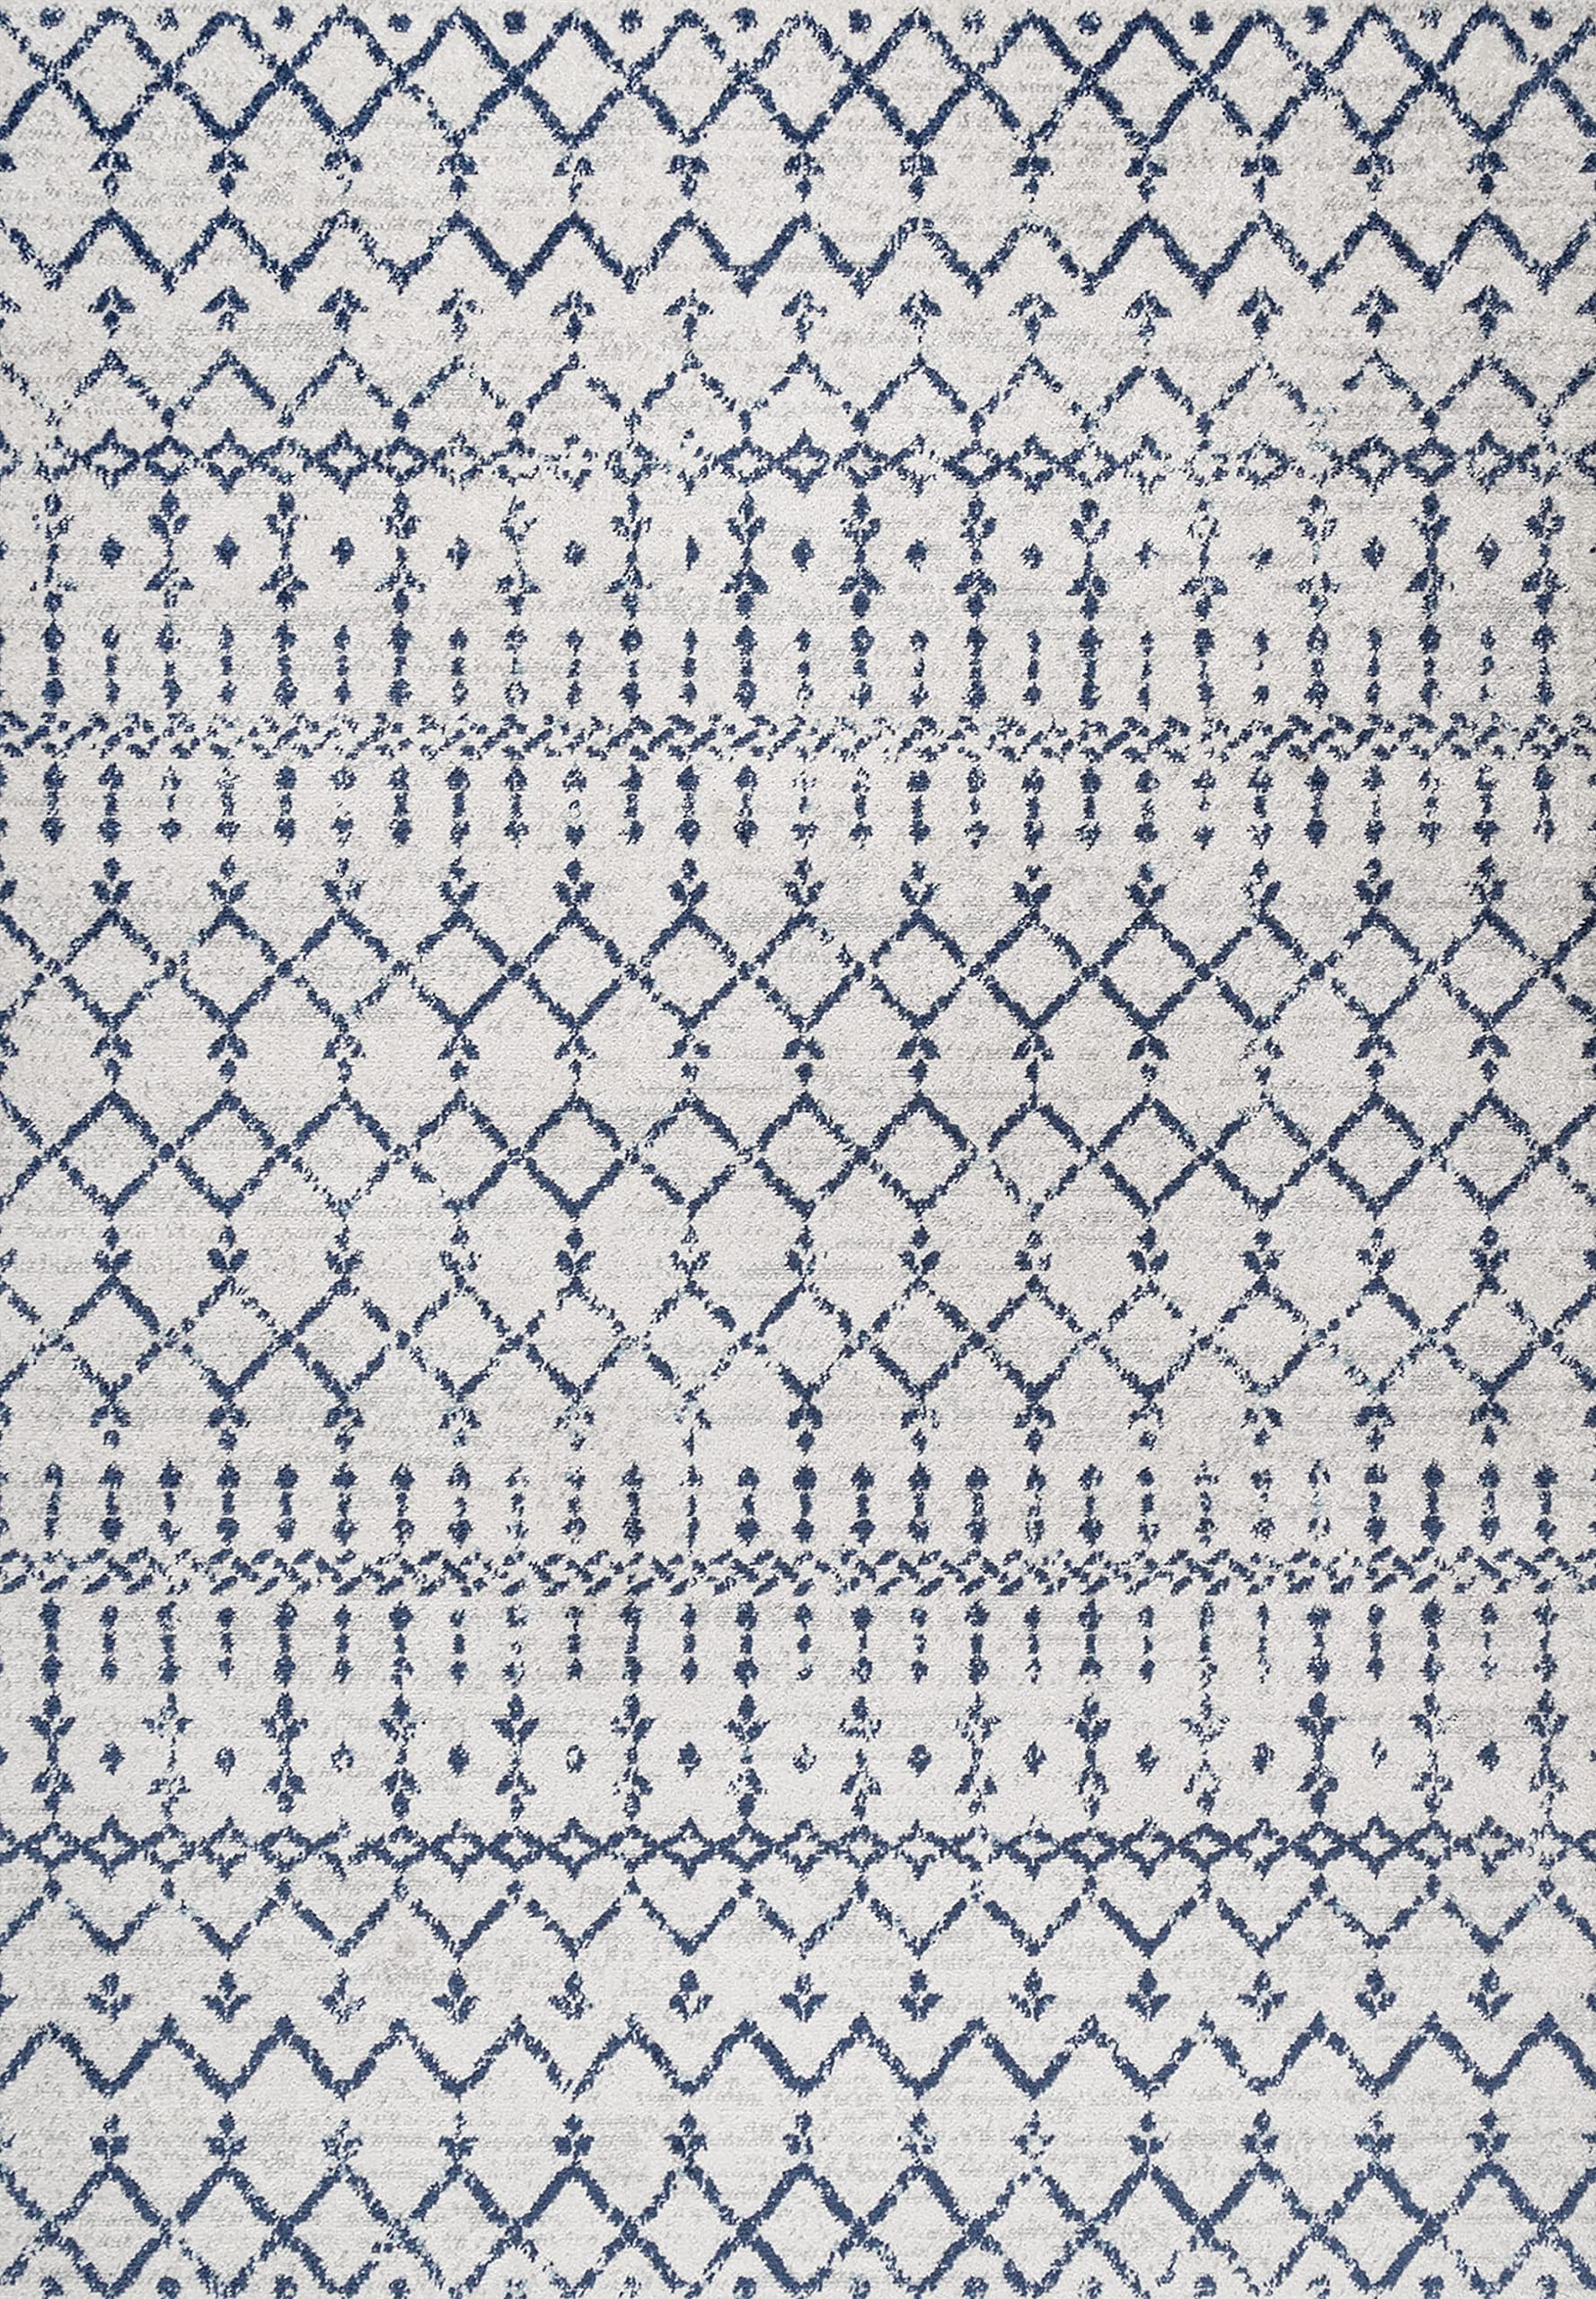 4' x 6' Jonathan Y Moroccan  Hype Boho Vintage Diamond Area Rug (Cream/Navy) $31.40, More + Free Shipping w/ Prime or on $25 or $35+